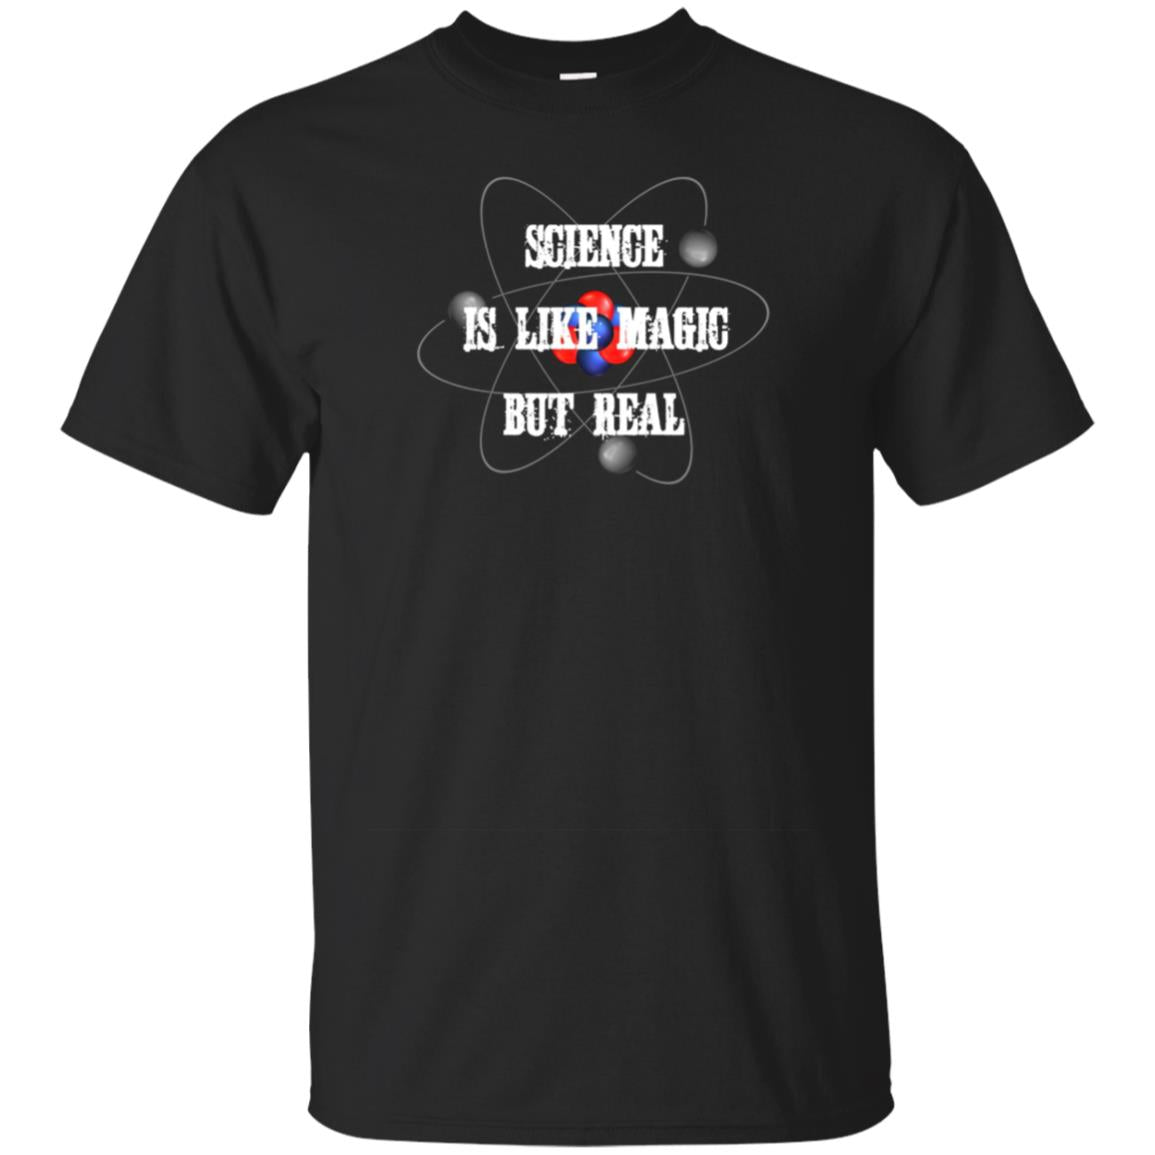 Science Is Like Magic But Real T Shirt